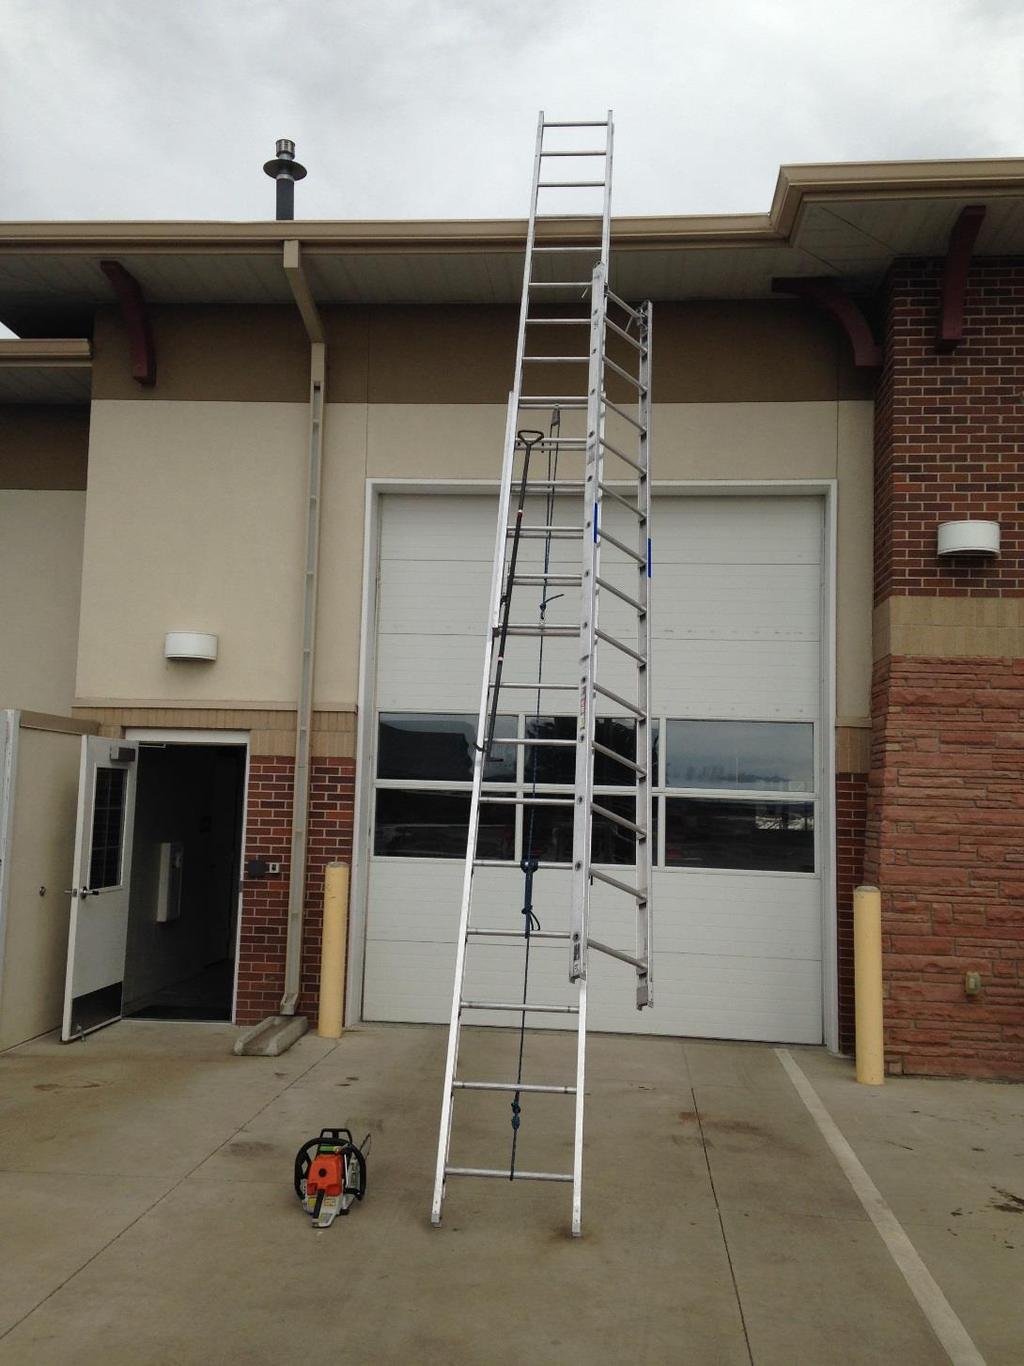 #16 The ground ladders are now setup and the firefighter s ascent for vertical ventilation can now commence.